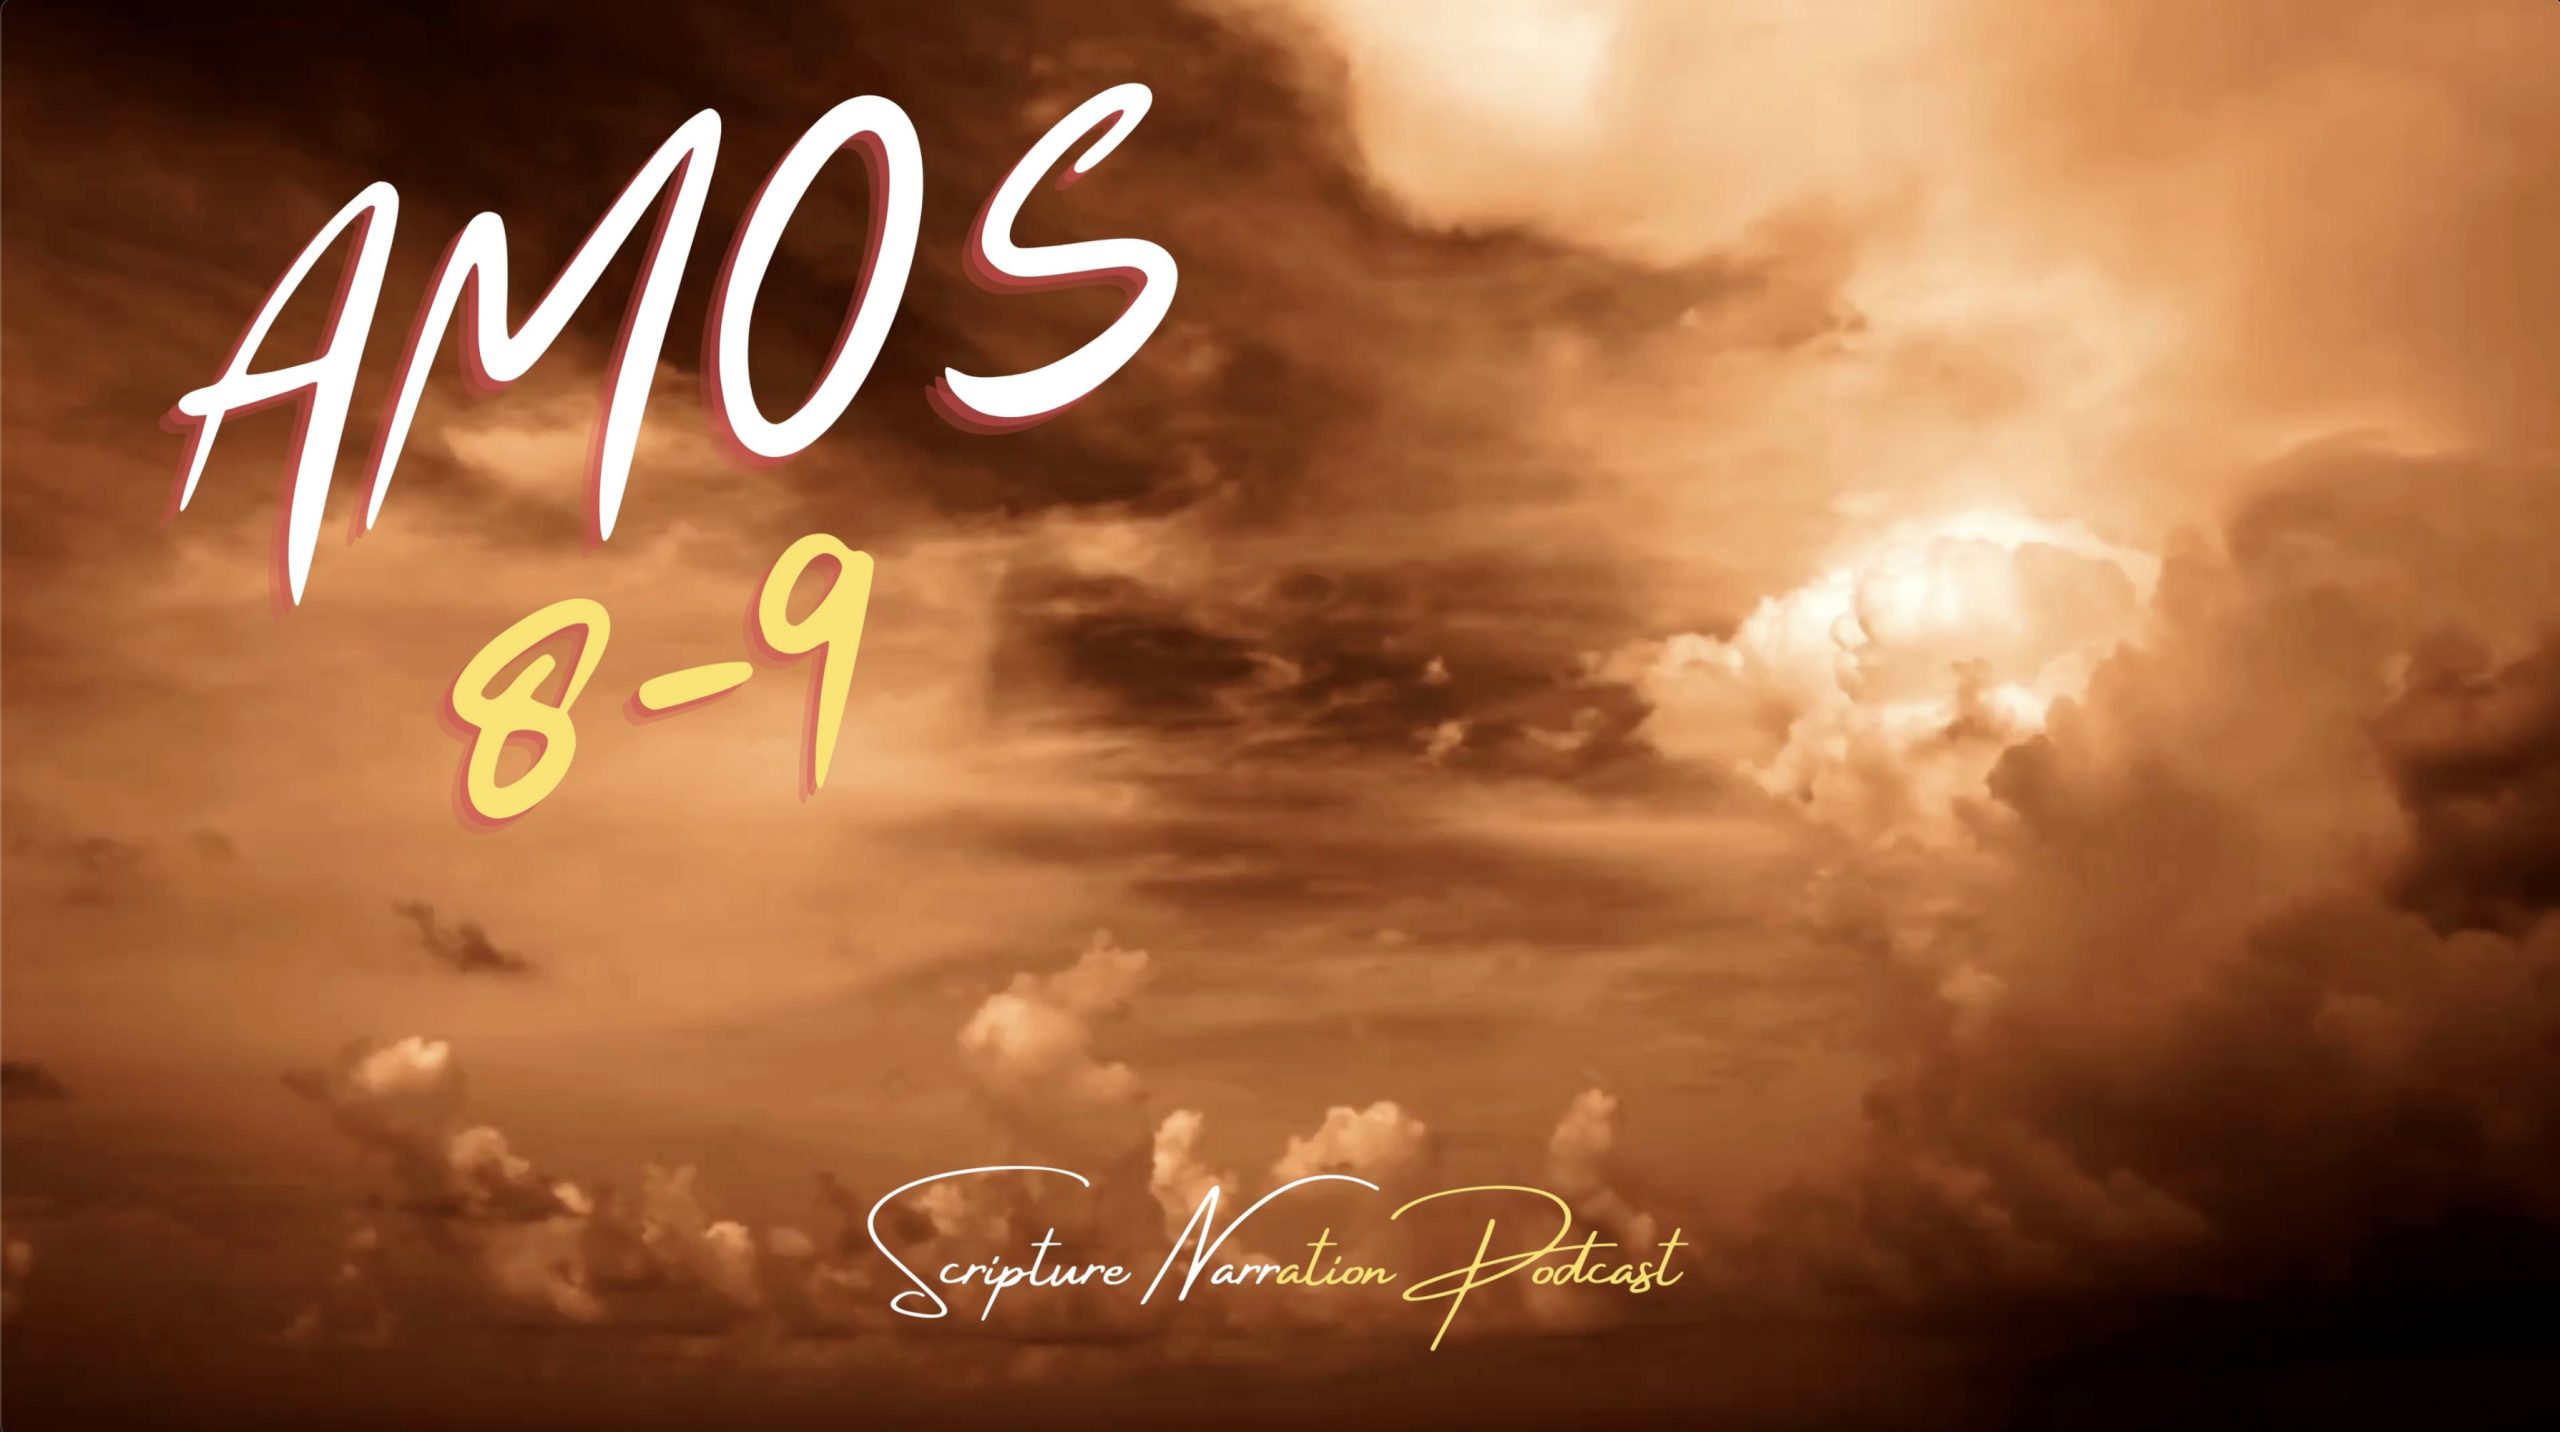 AMOS 8-9 with constant rainfall and rumble thunder Scripture Narration Podcast- Season:3 Episode 10 Judgement comes